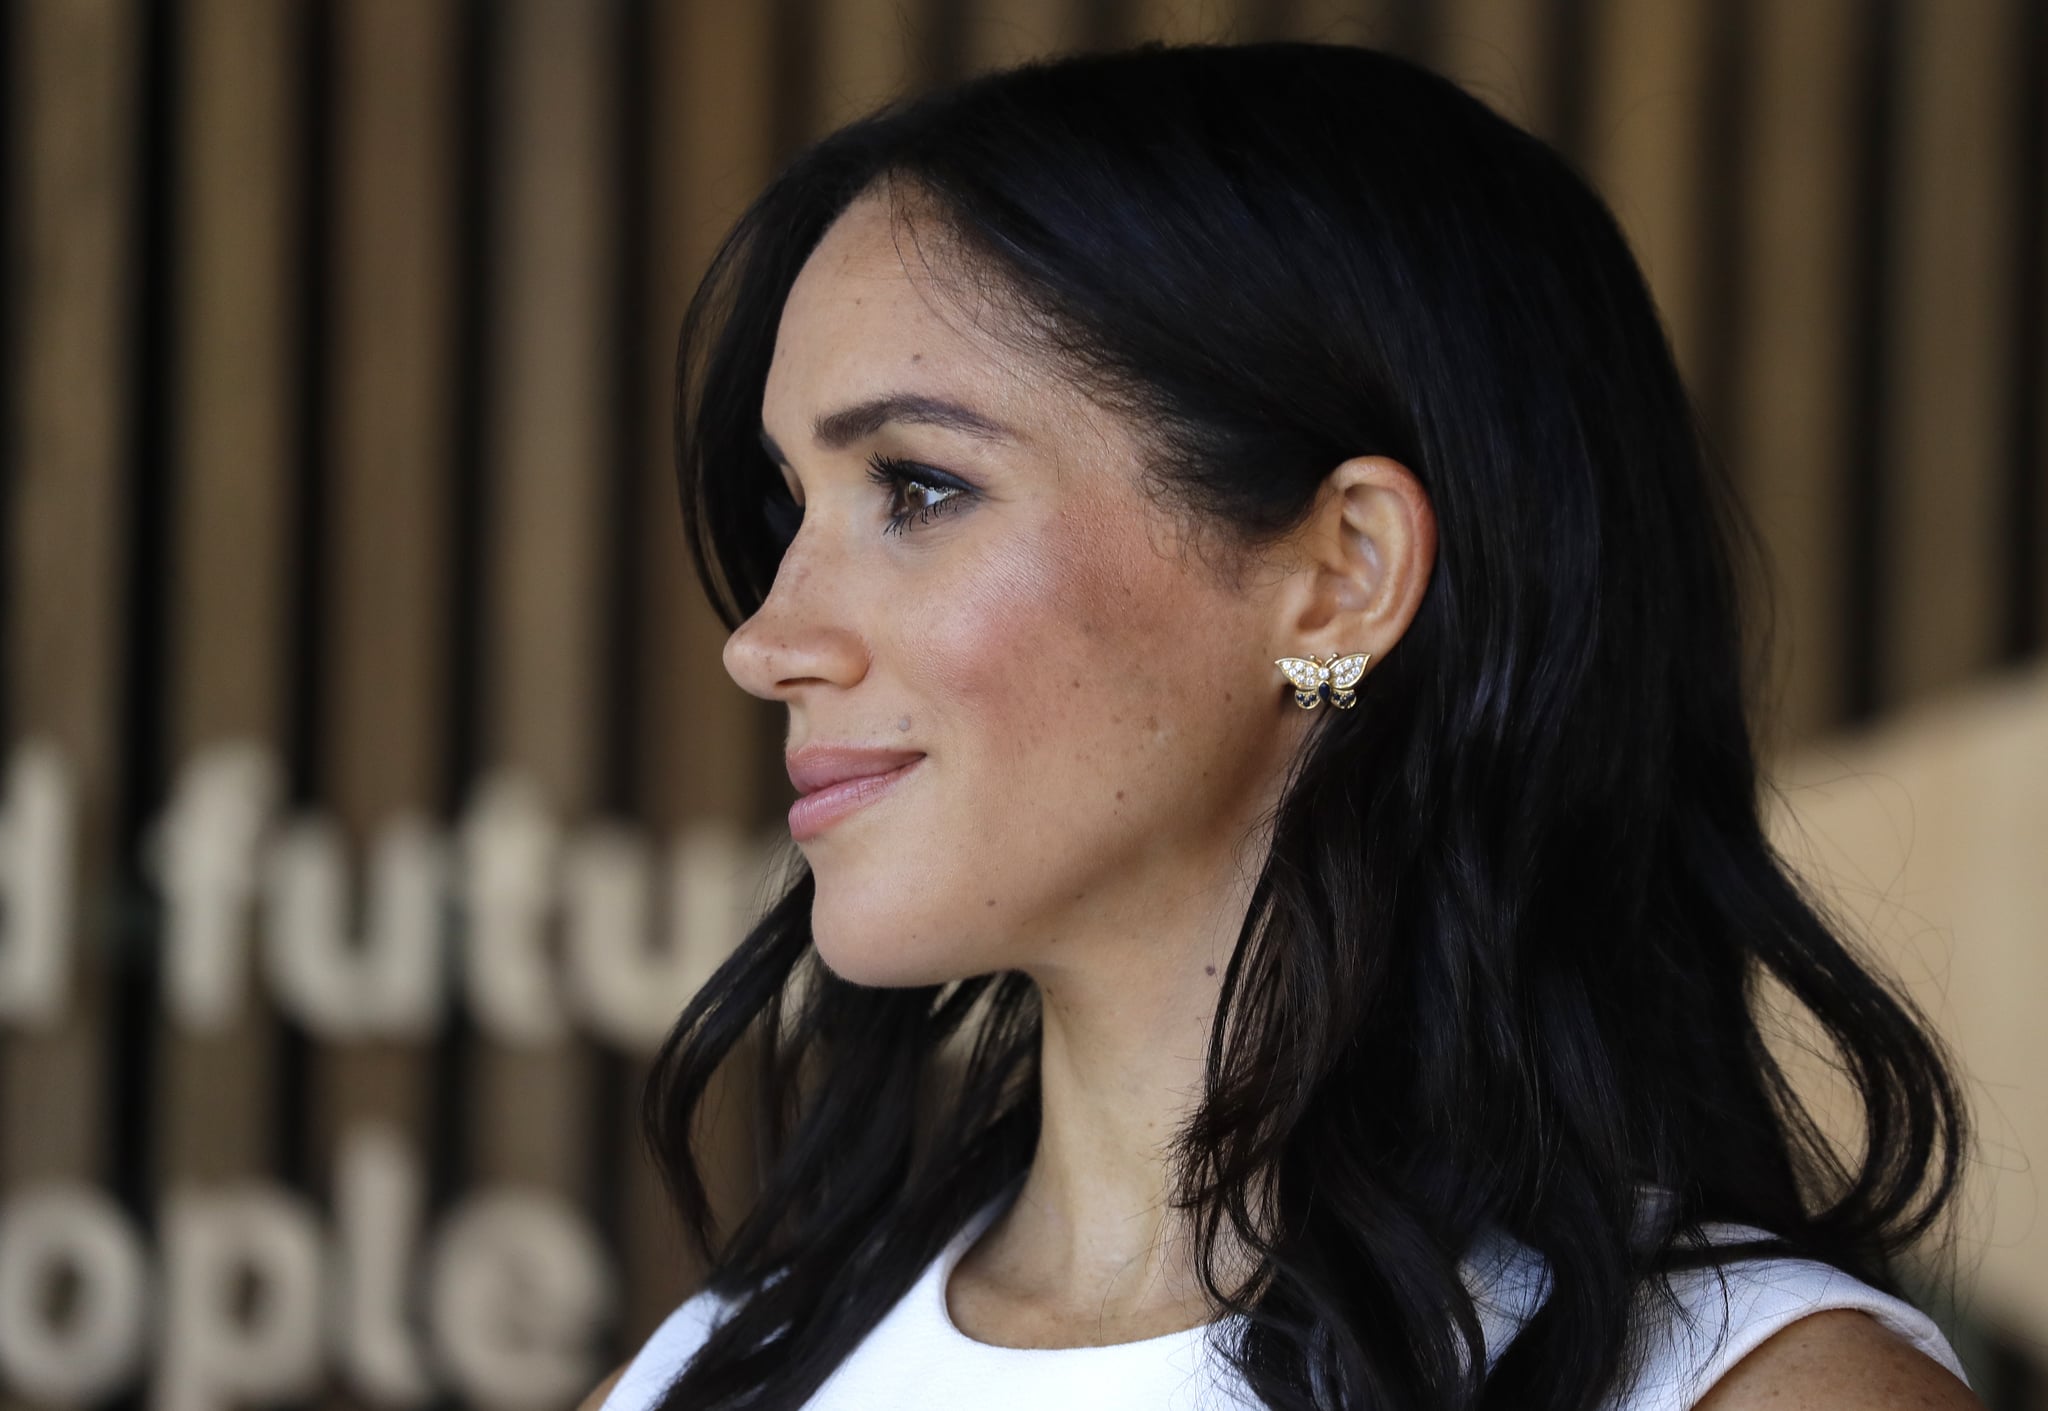 SYDNEY, AUSTRALIA - OCTOBER 16:  Meghan, Duchess of Sussex attends a ceremony at Taronga Zoo on October 16, 2018 in Sydney, Australia. The Duke and Duchess of Sussex are on their official 16-day Autumn tour visiting cities in Australia, Fiji, Tonga and New Zealand.  (Photo by Kristy Wigglesworth – Pool/Getty Images)